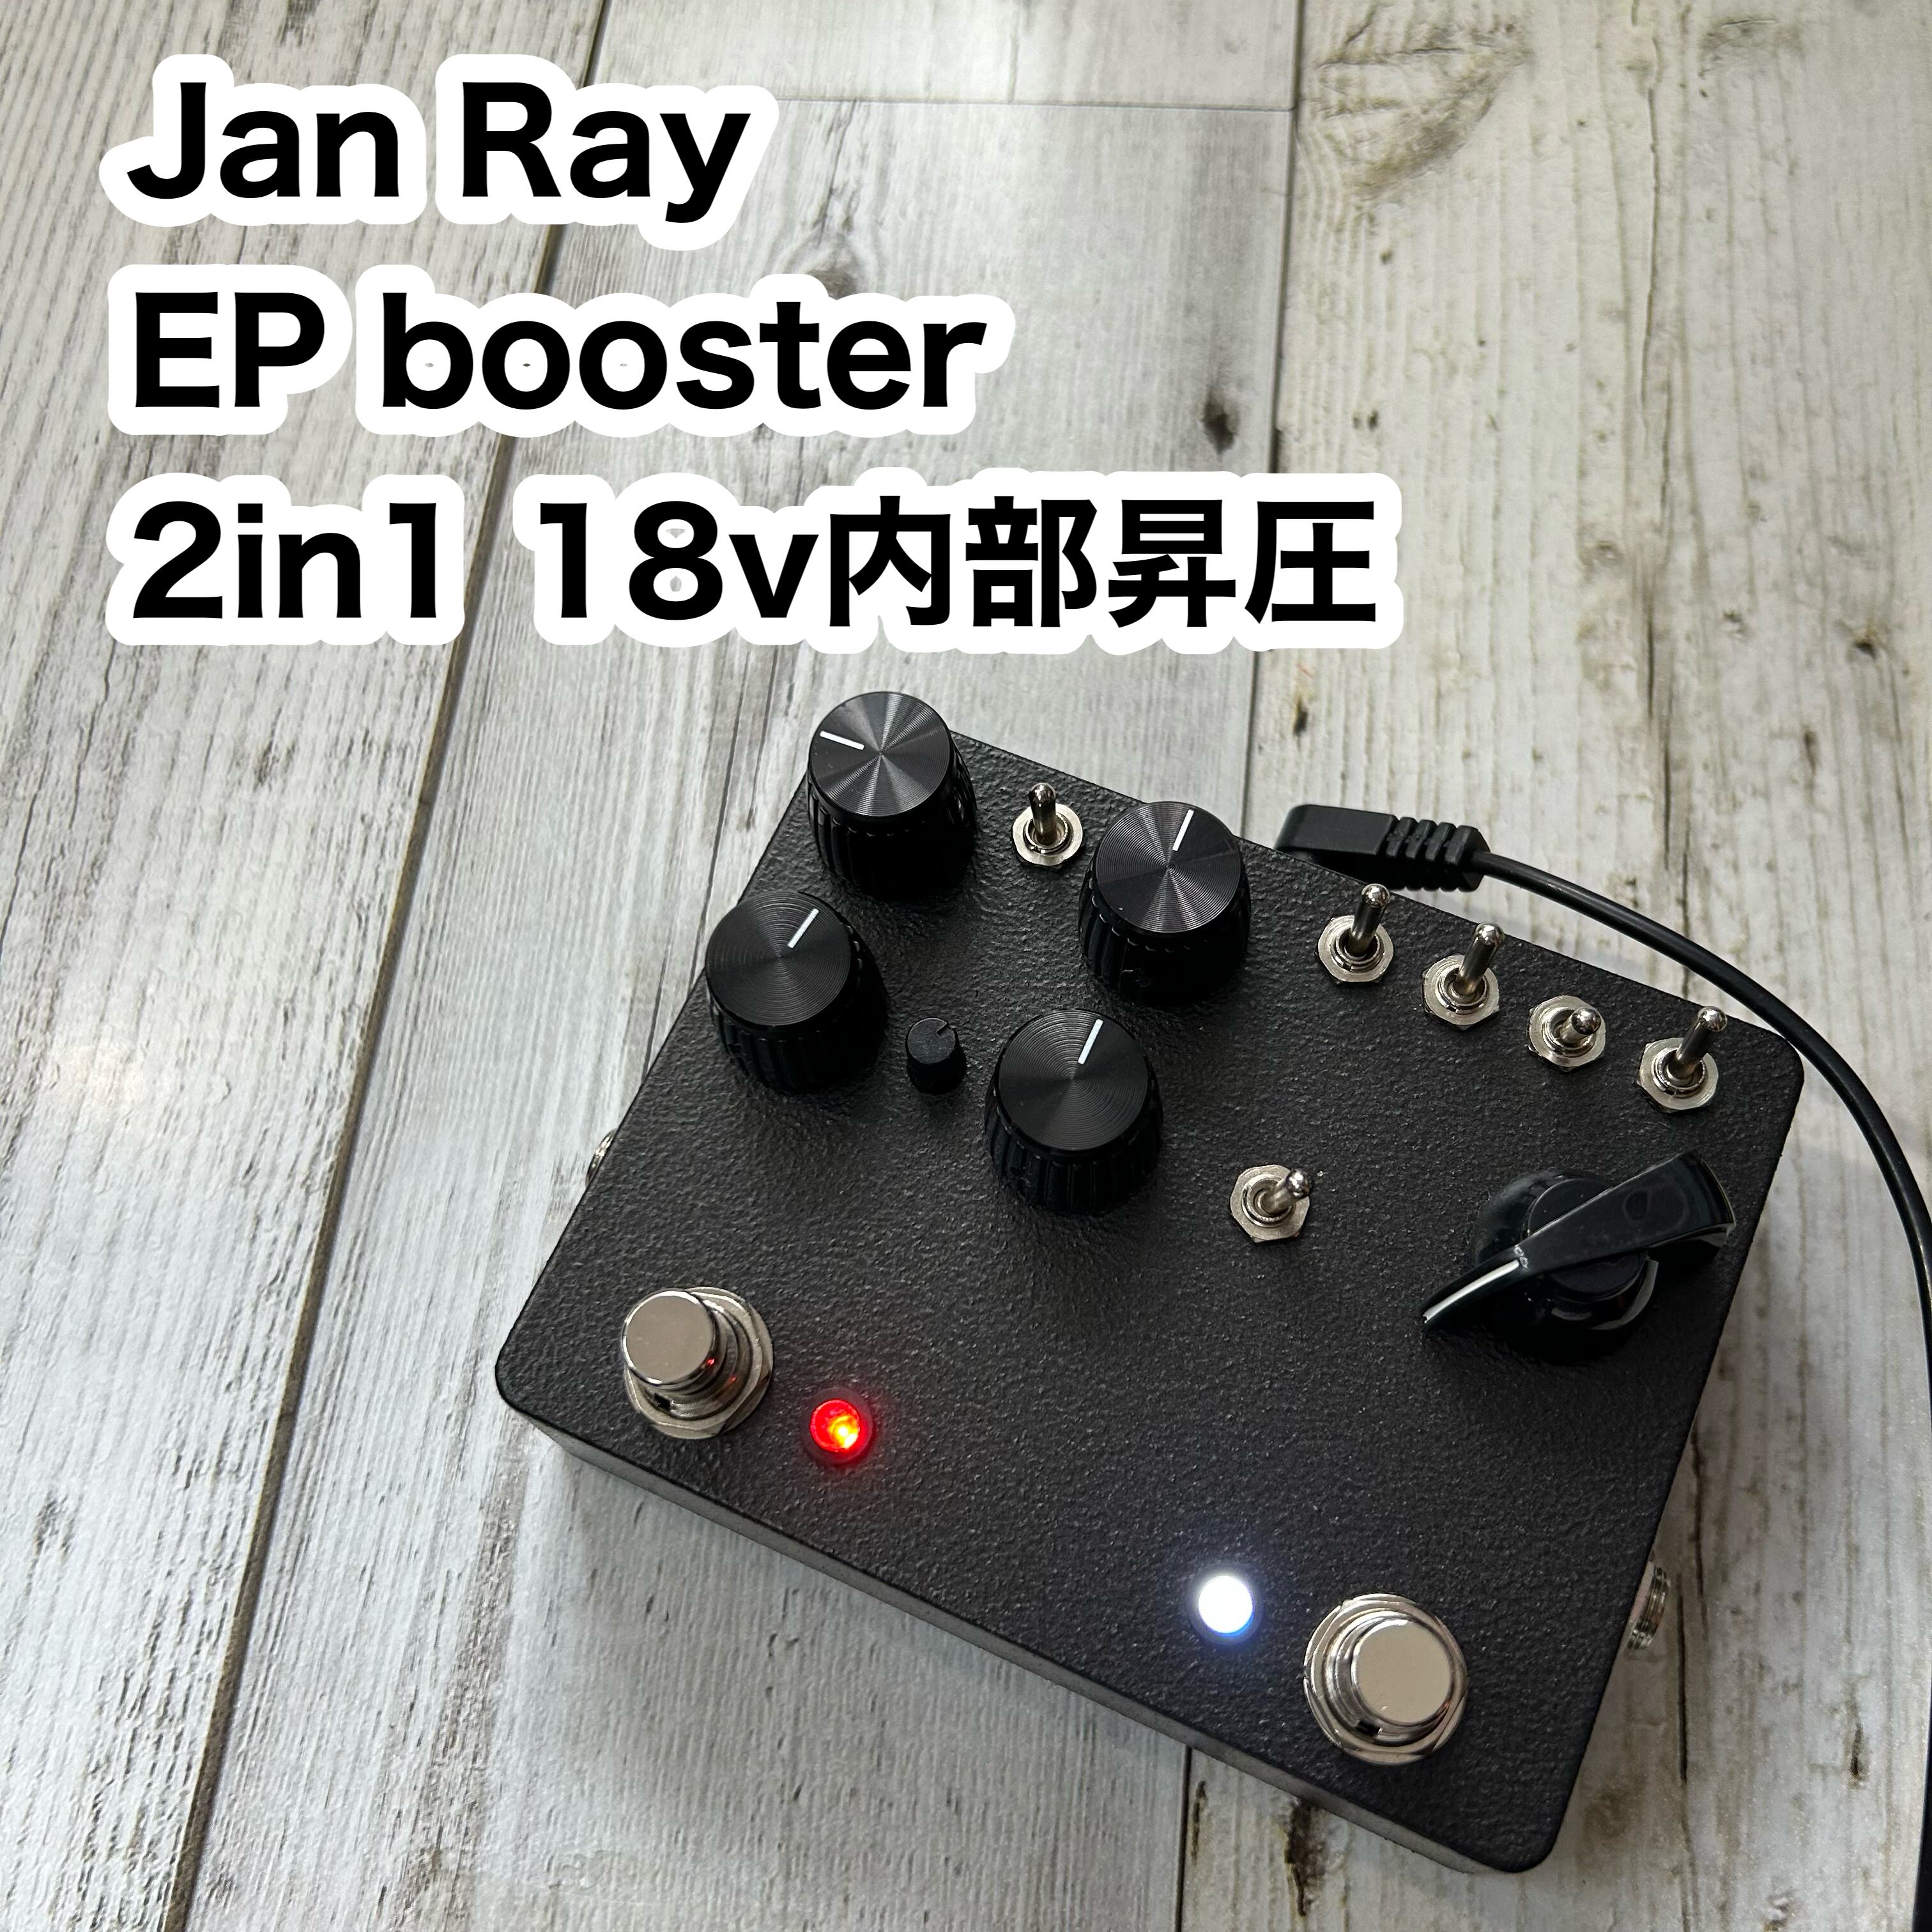 Jan Ray + EP booster 2in1 18v - 器材